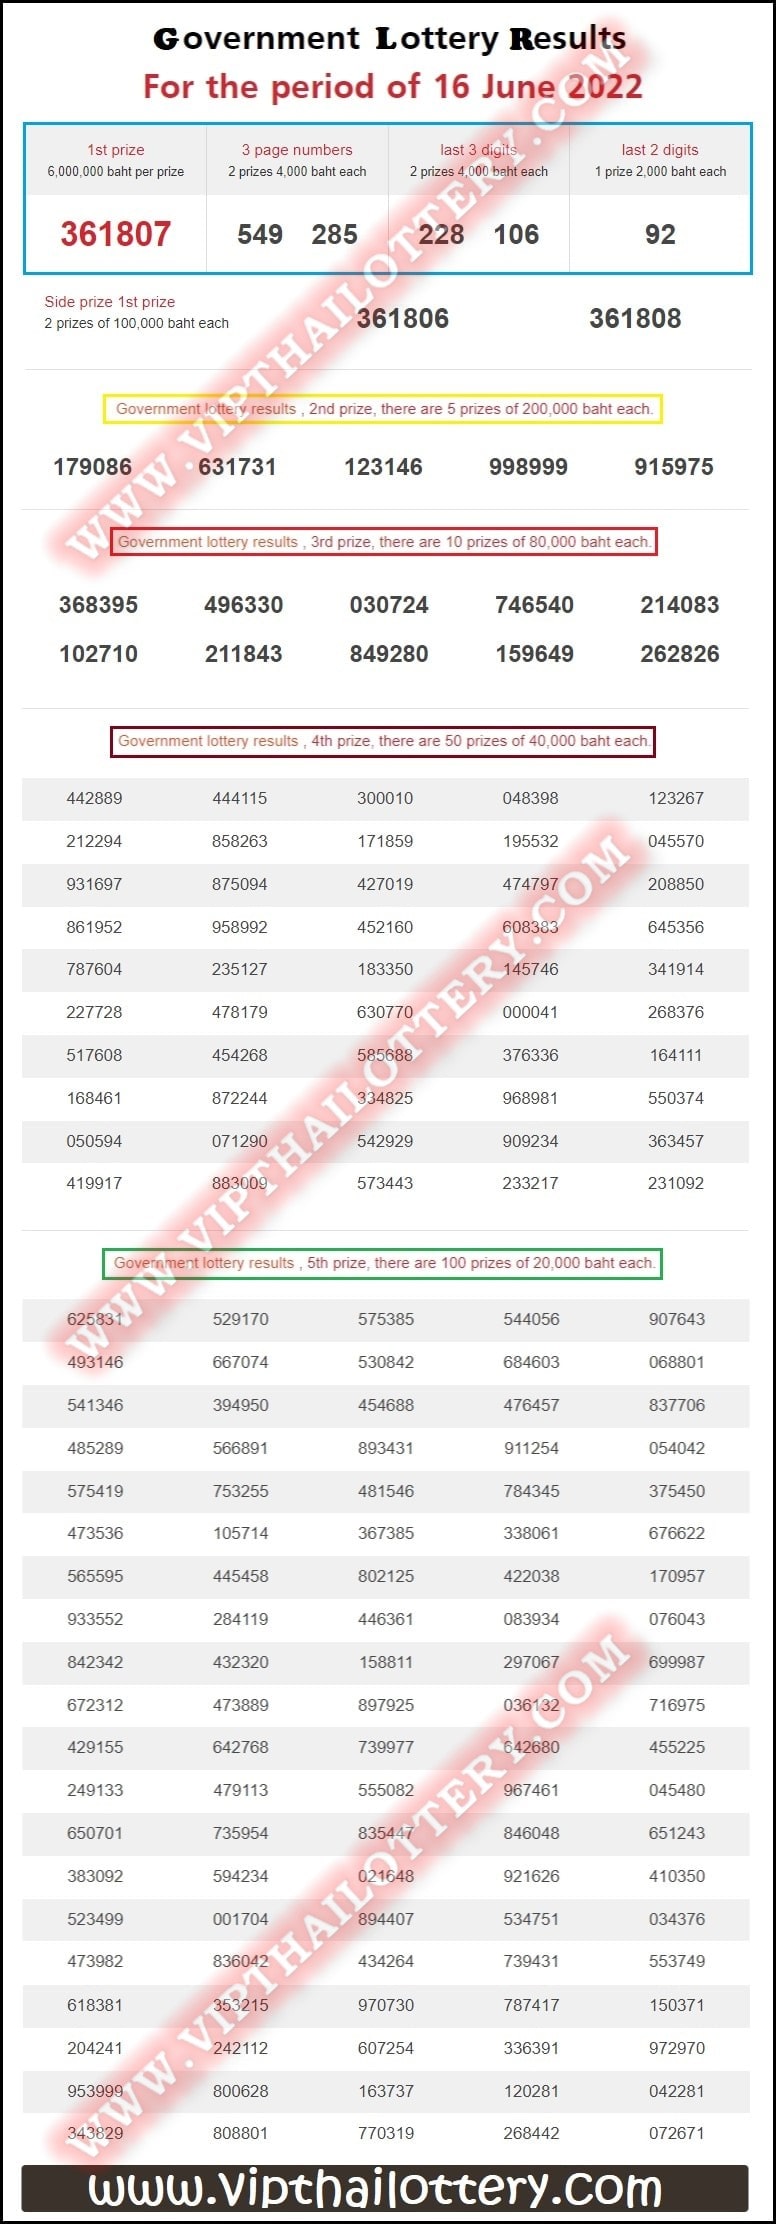 Thai Government Lottery GLO Results Full Chart Sheet 16 June 2022-min